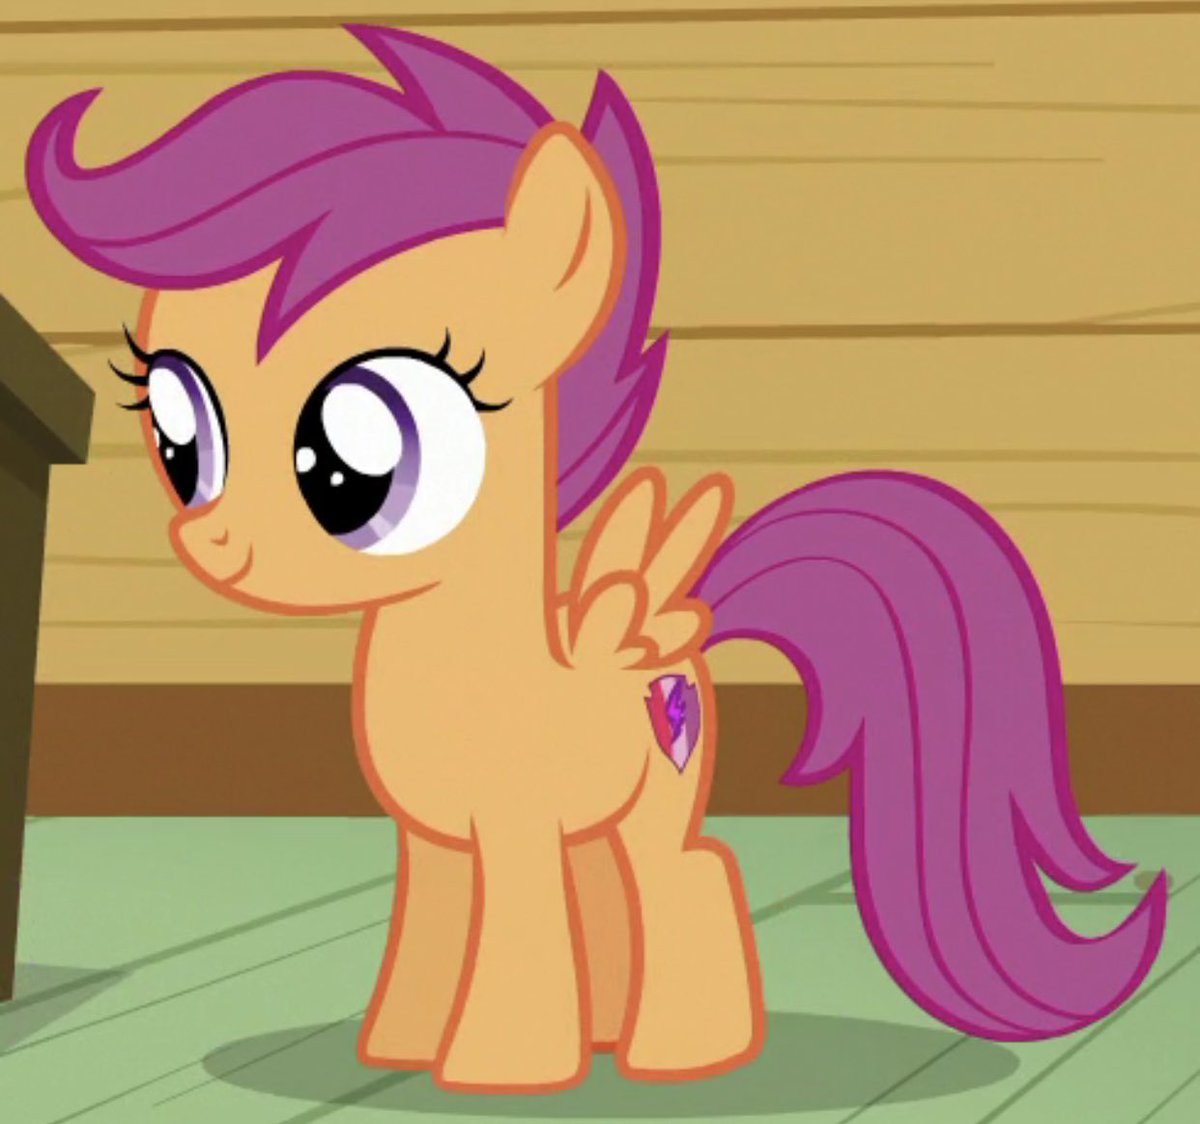 Tanaka as Scootaloo - impulsive, brash, act before thinking - loyal to their friends, confronts anyone who bothers them- focus on what matters to them (volleyball, learning to fly) may neglect activities they wish to avoid (school)